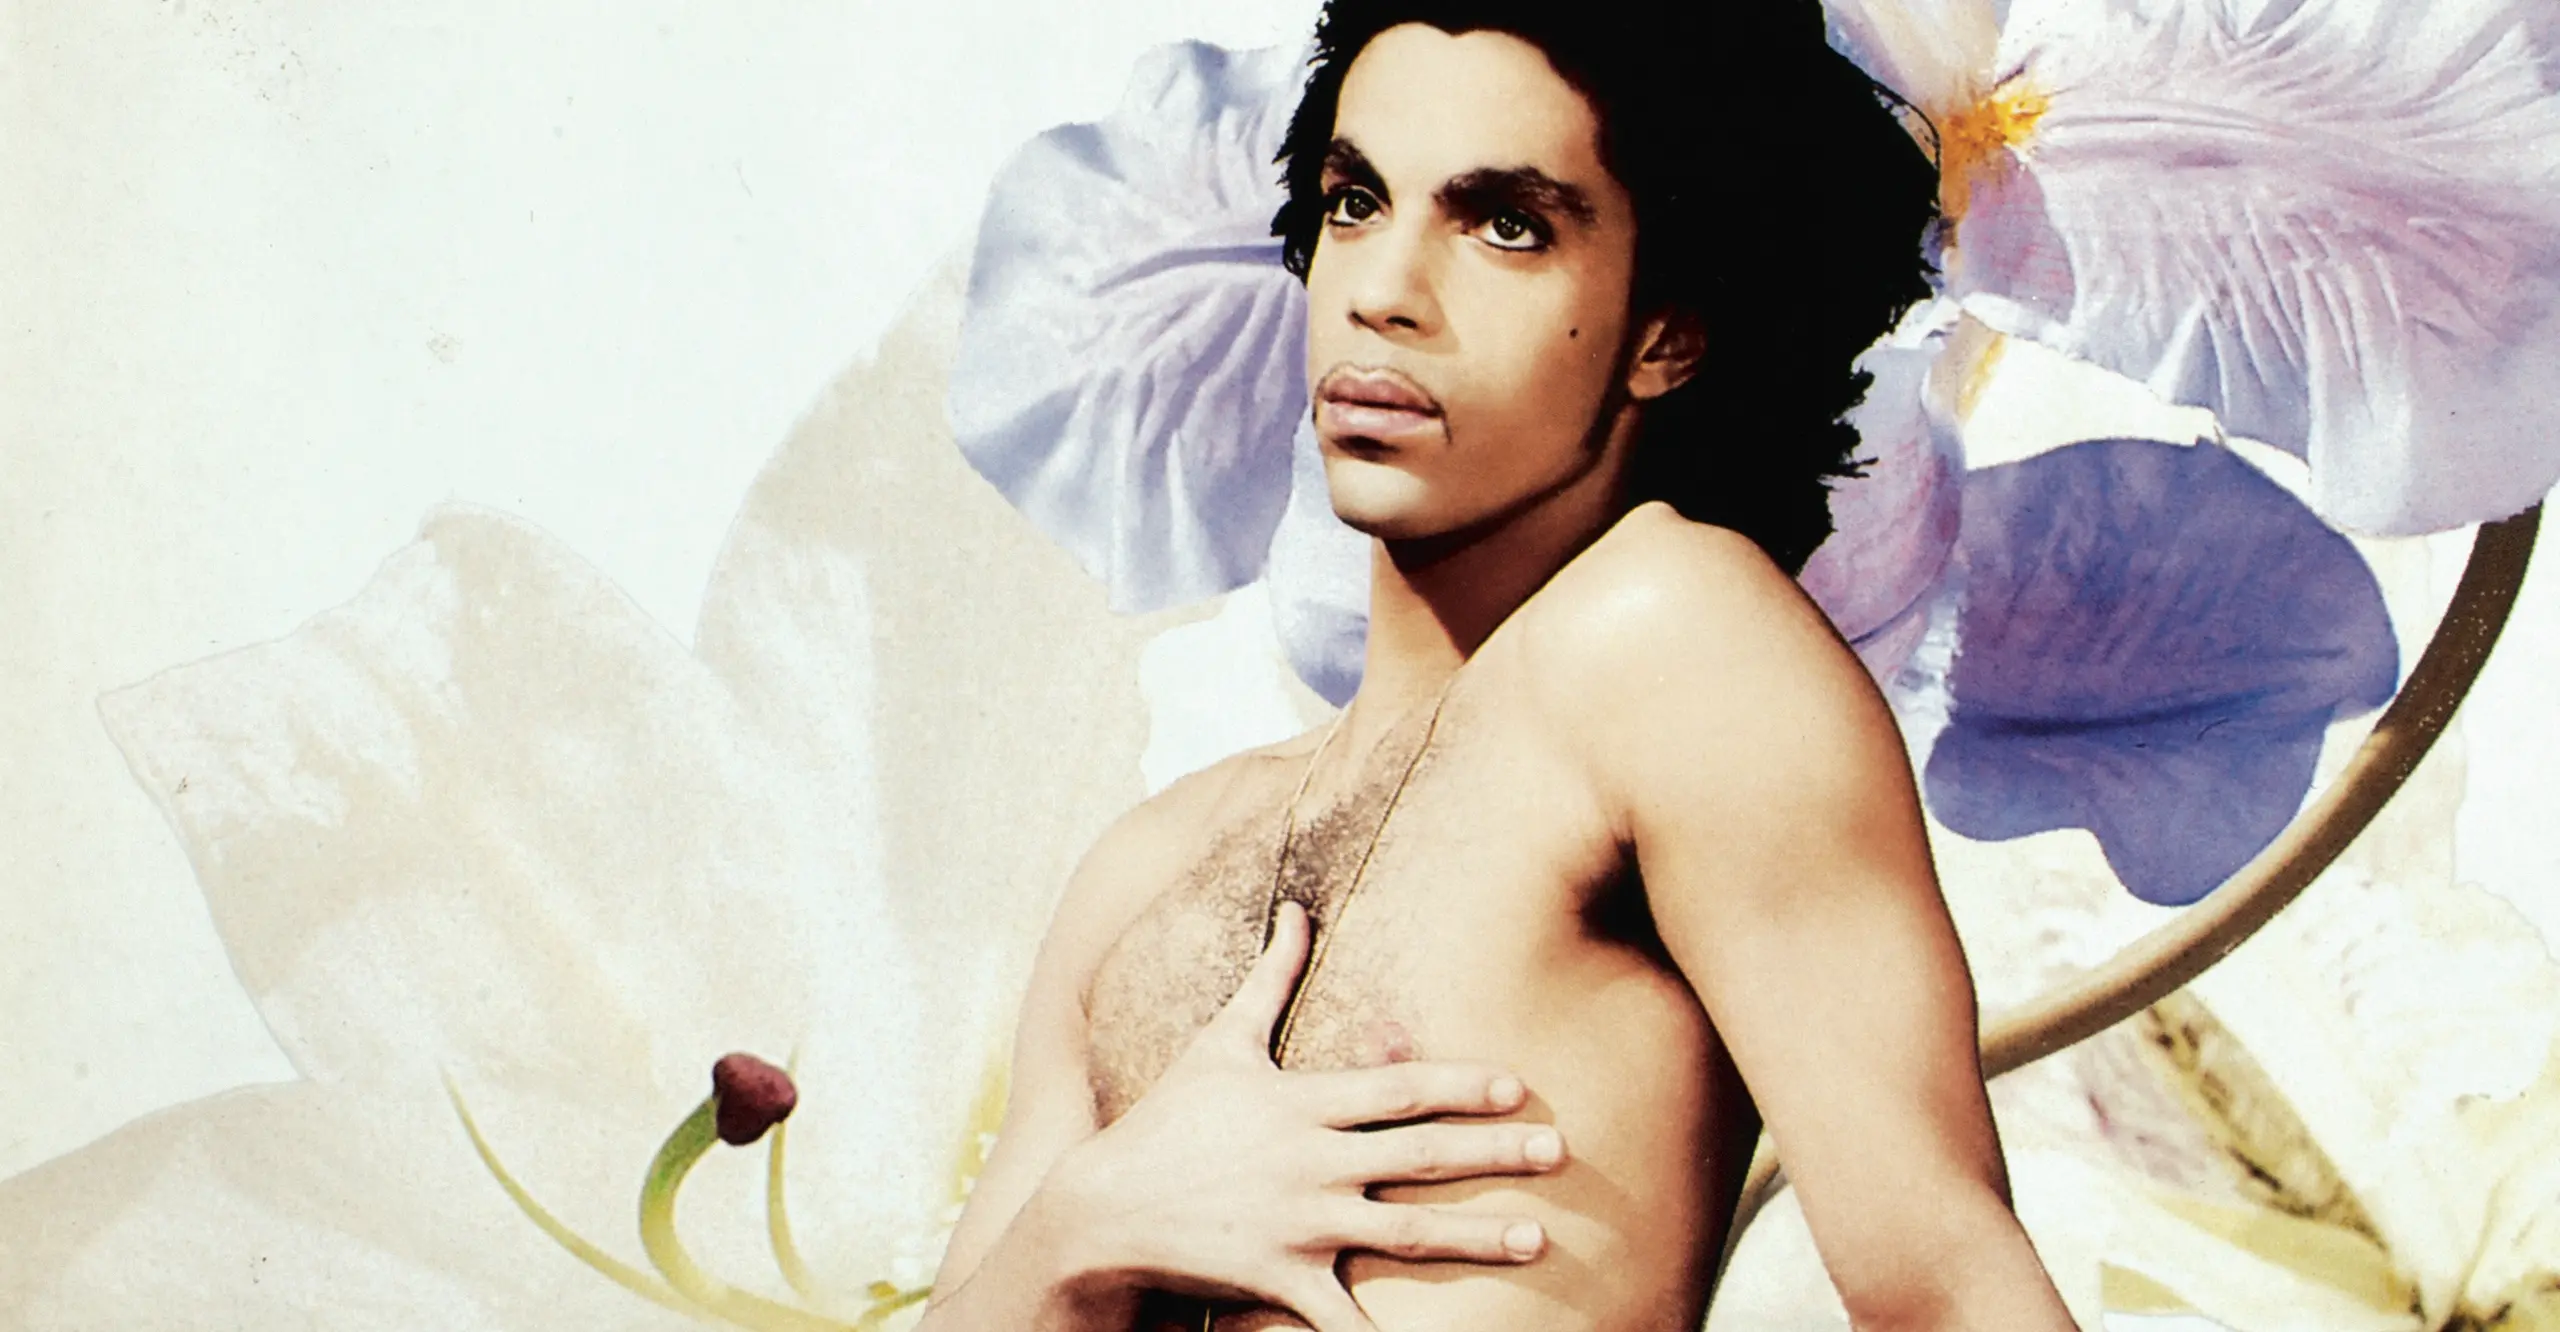 The musician Prince poses naked, eyes looking dolefully upward, against a large flower backdrop.. 